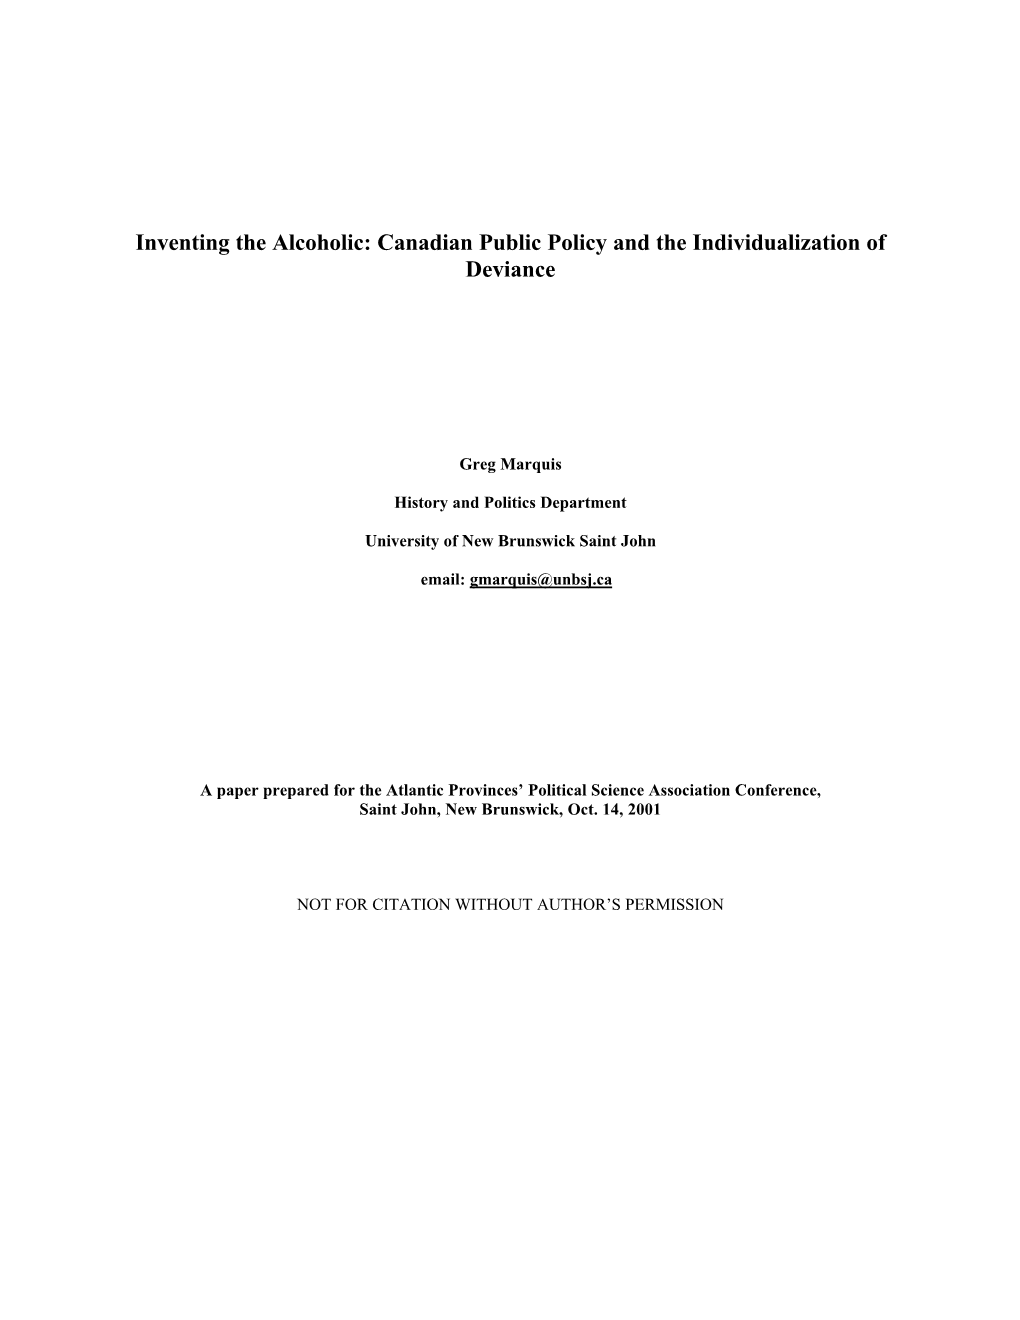 Inventing the Alcoholic: Canadian Public Policy and the Individualization of Deviance